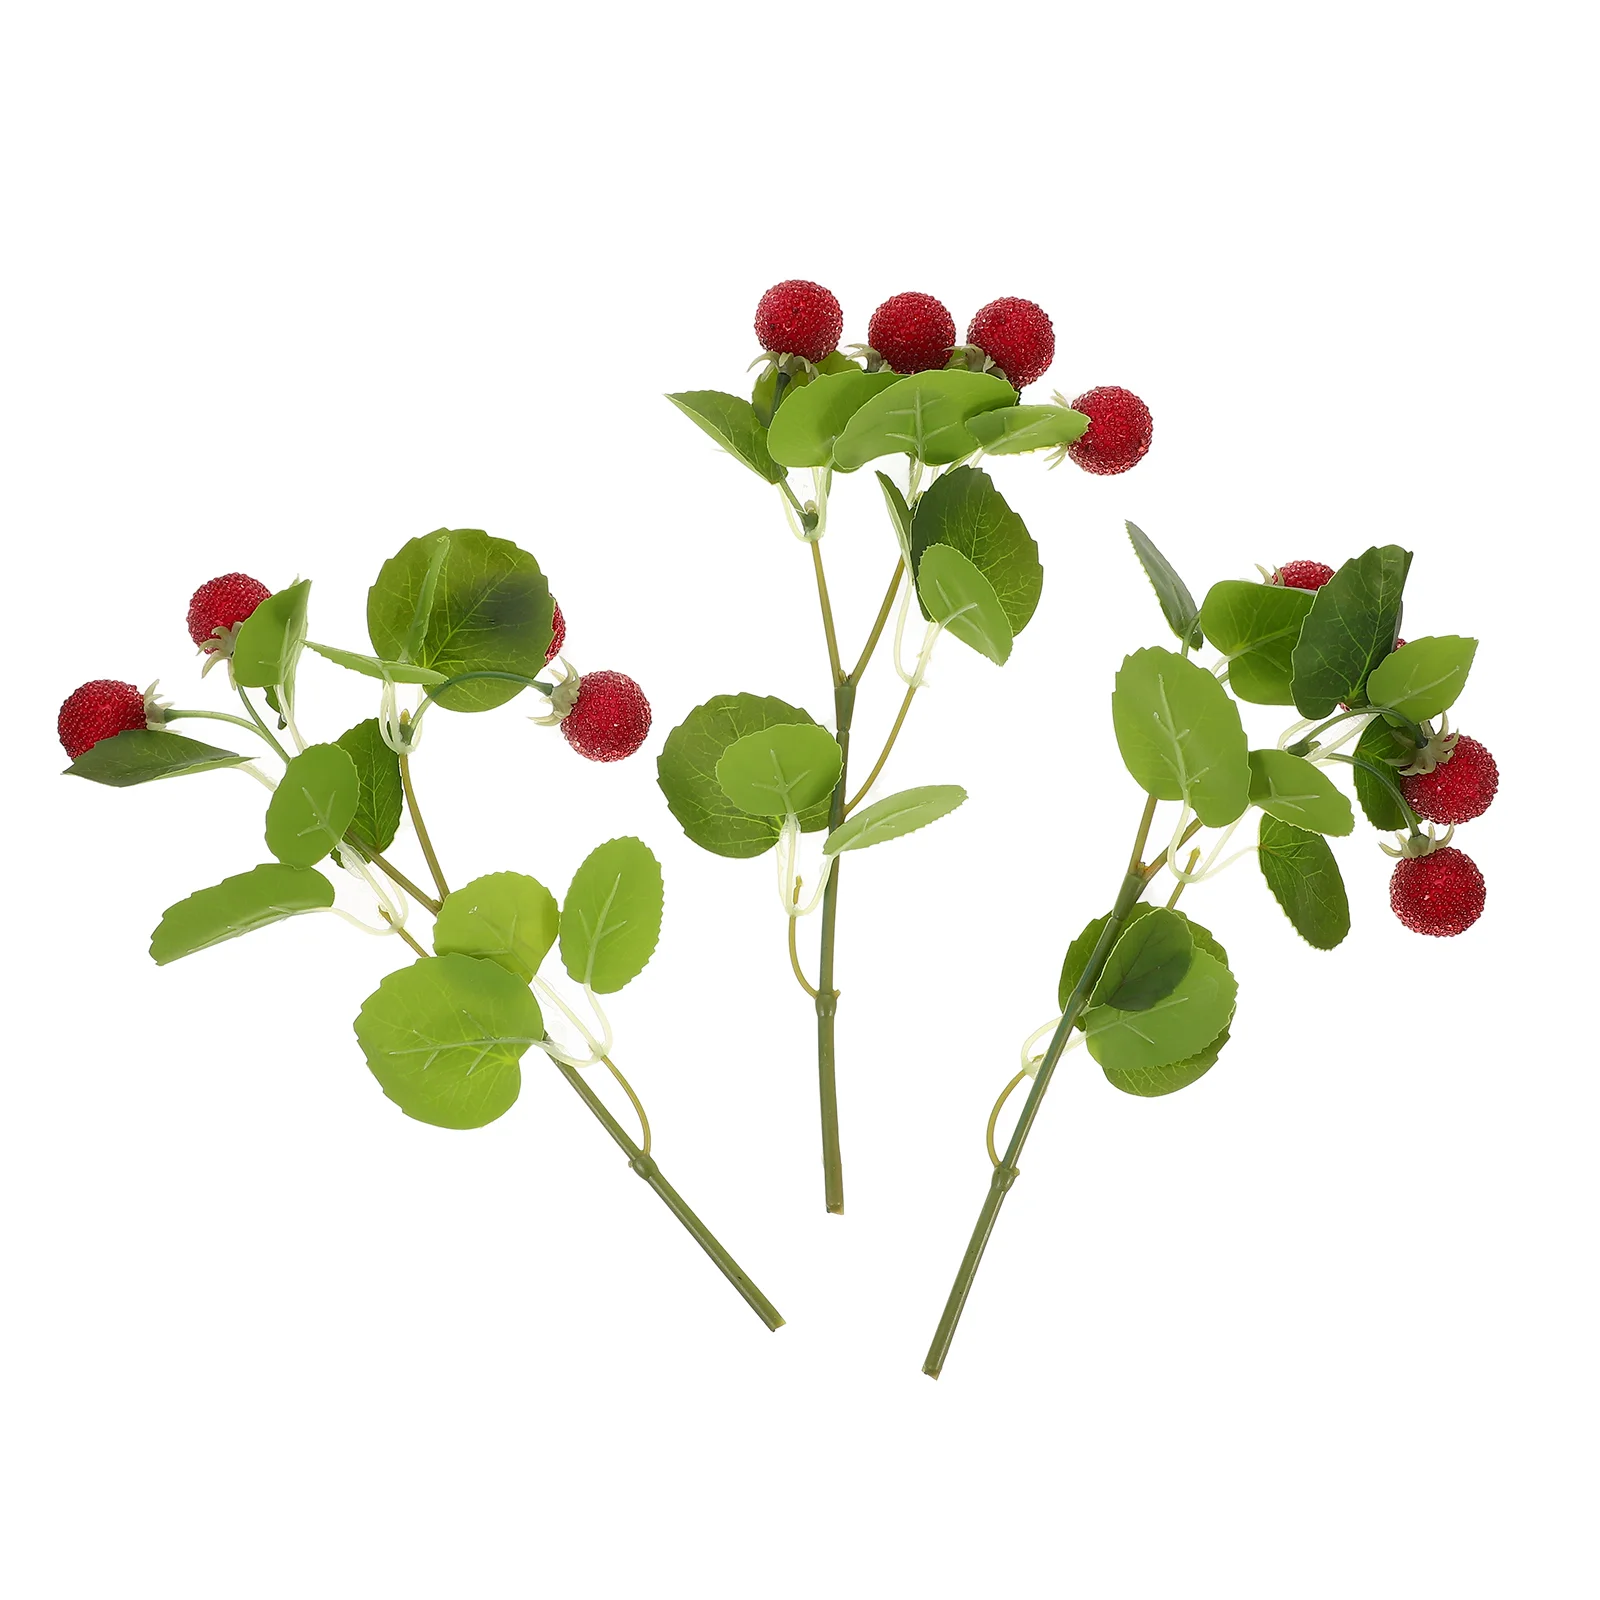 

Stems Artificial Fake Berry Fruit Berries Picks Faux Stem Plastic Branches Flower Strawberry Red Greenery Holly Decor Ornaments